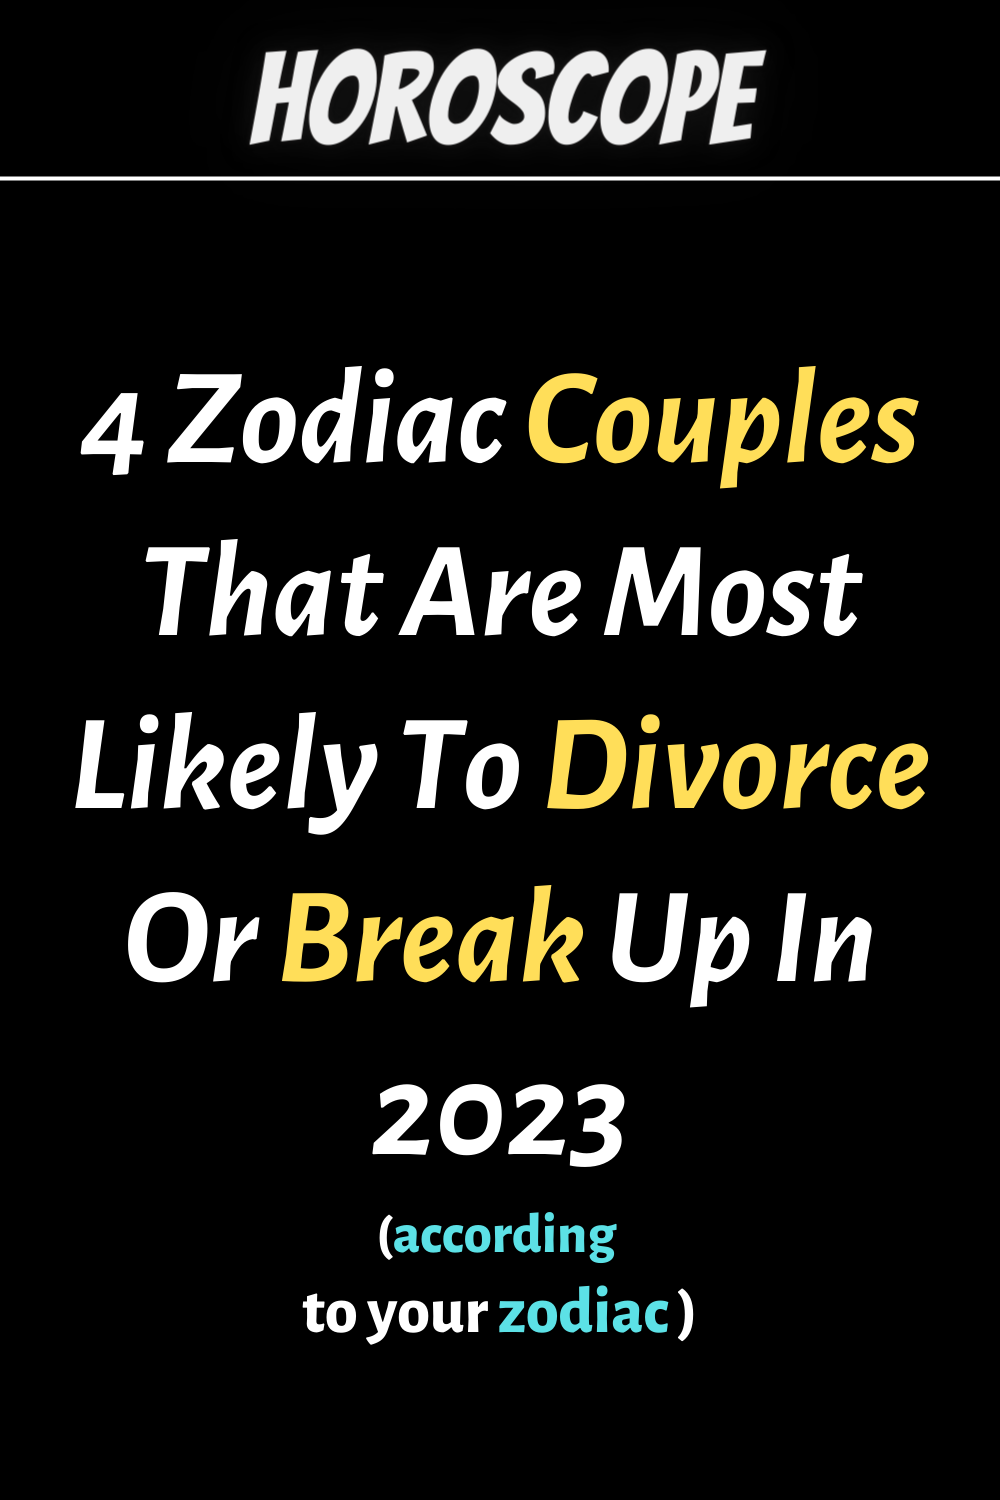 4 Zodiac Couples That Are Most Likely To Divorce Or Break Up In 2023